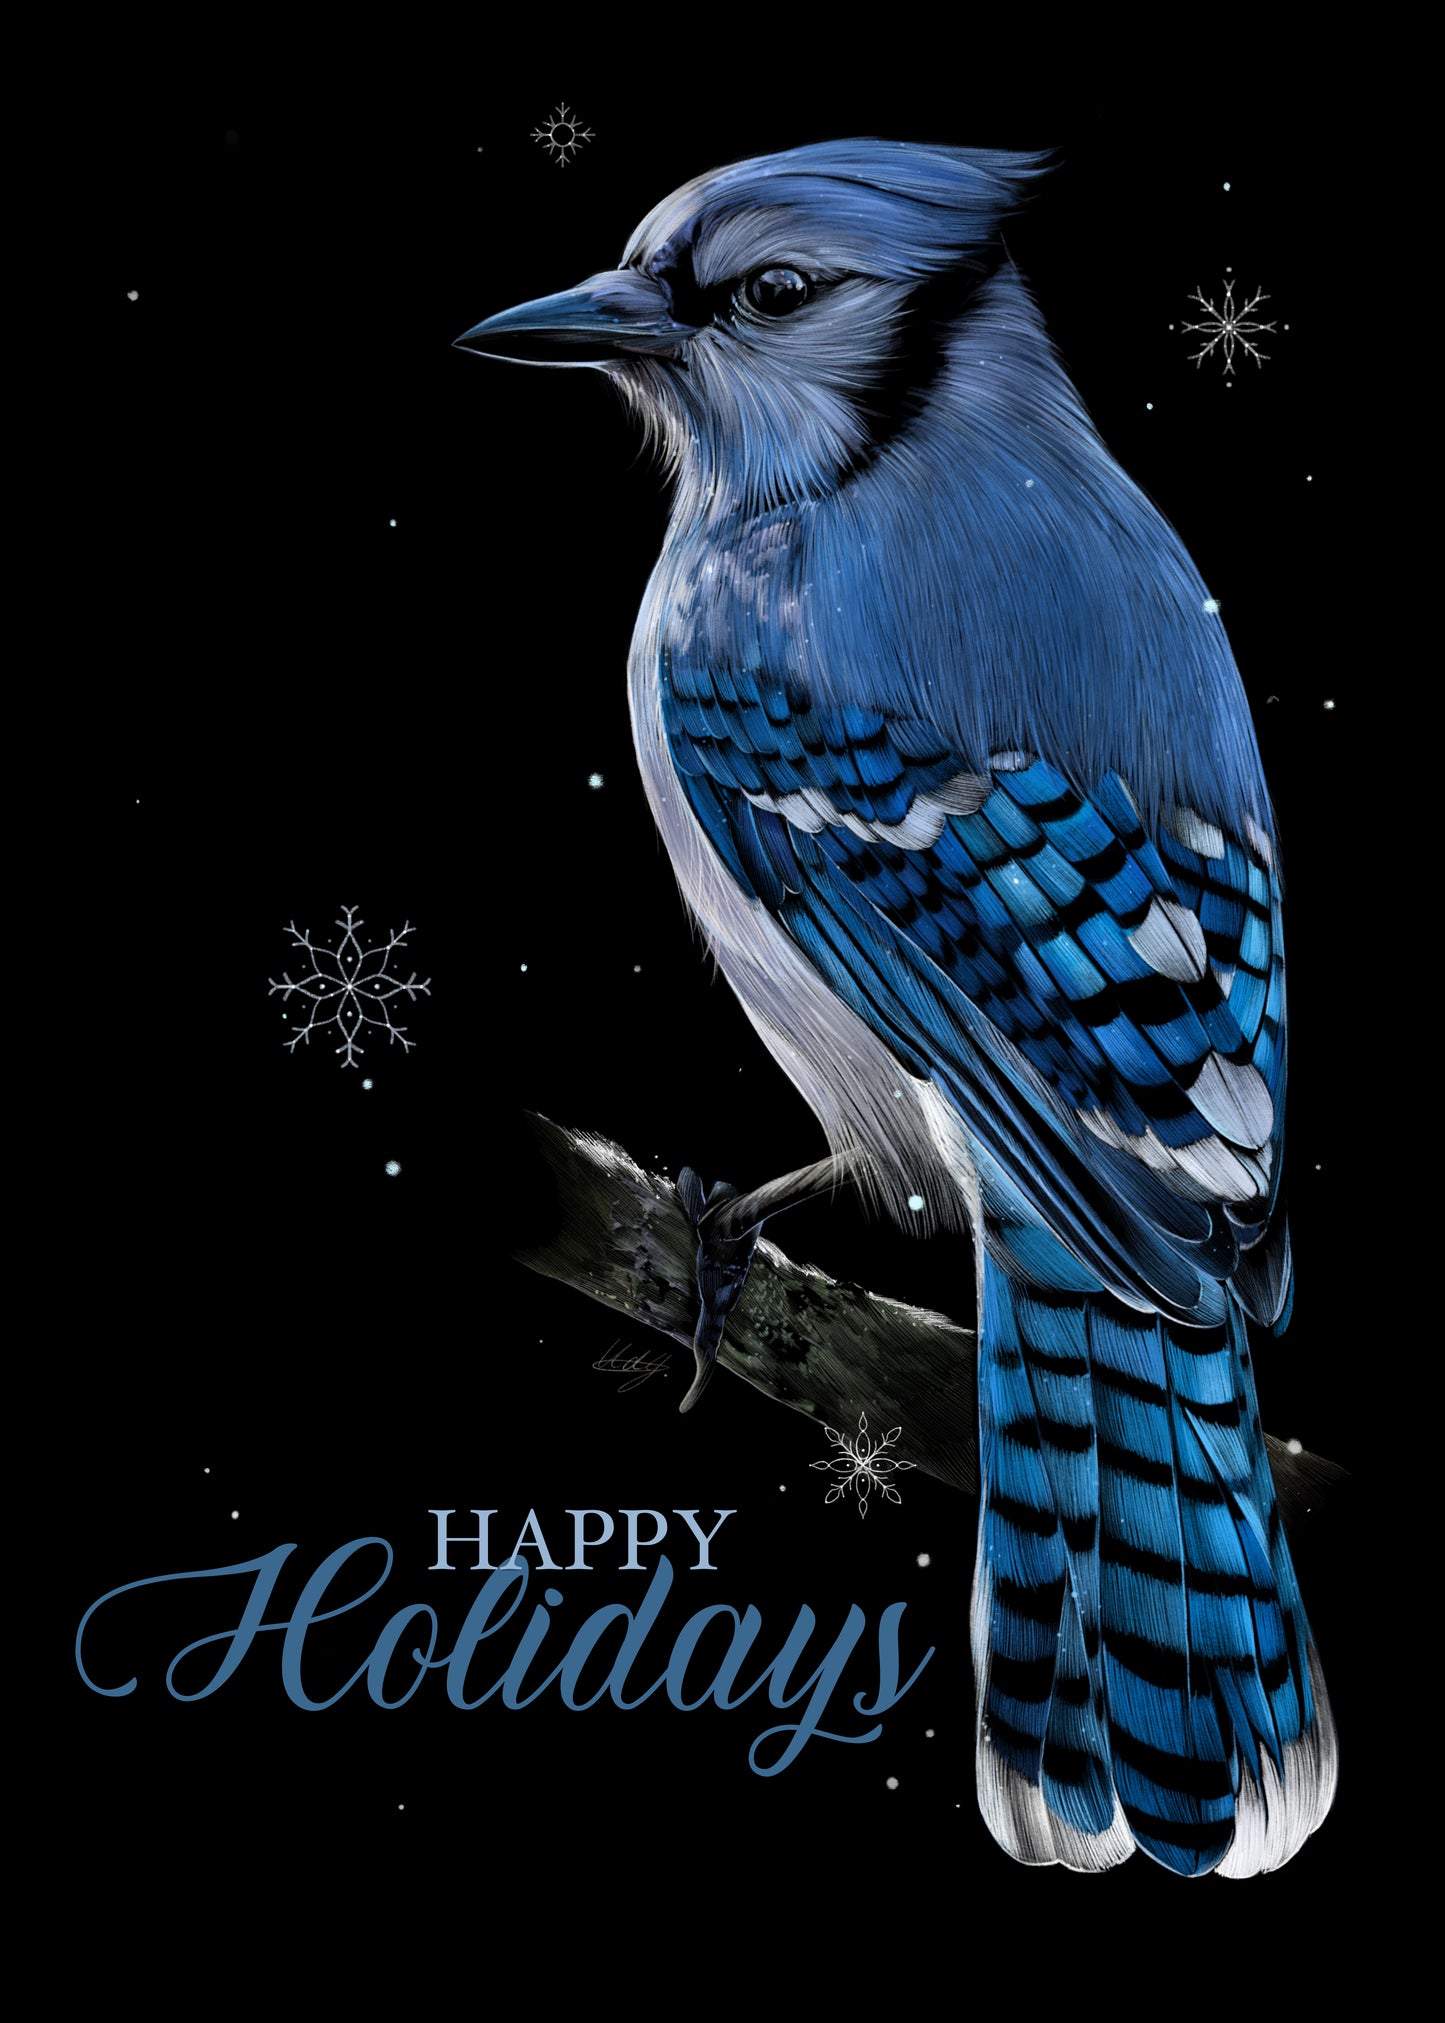 A holiday card featuring a blue jay with snowflakes falling. It reads "Happy Holidays."